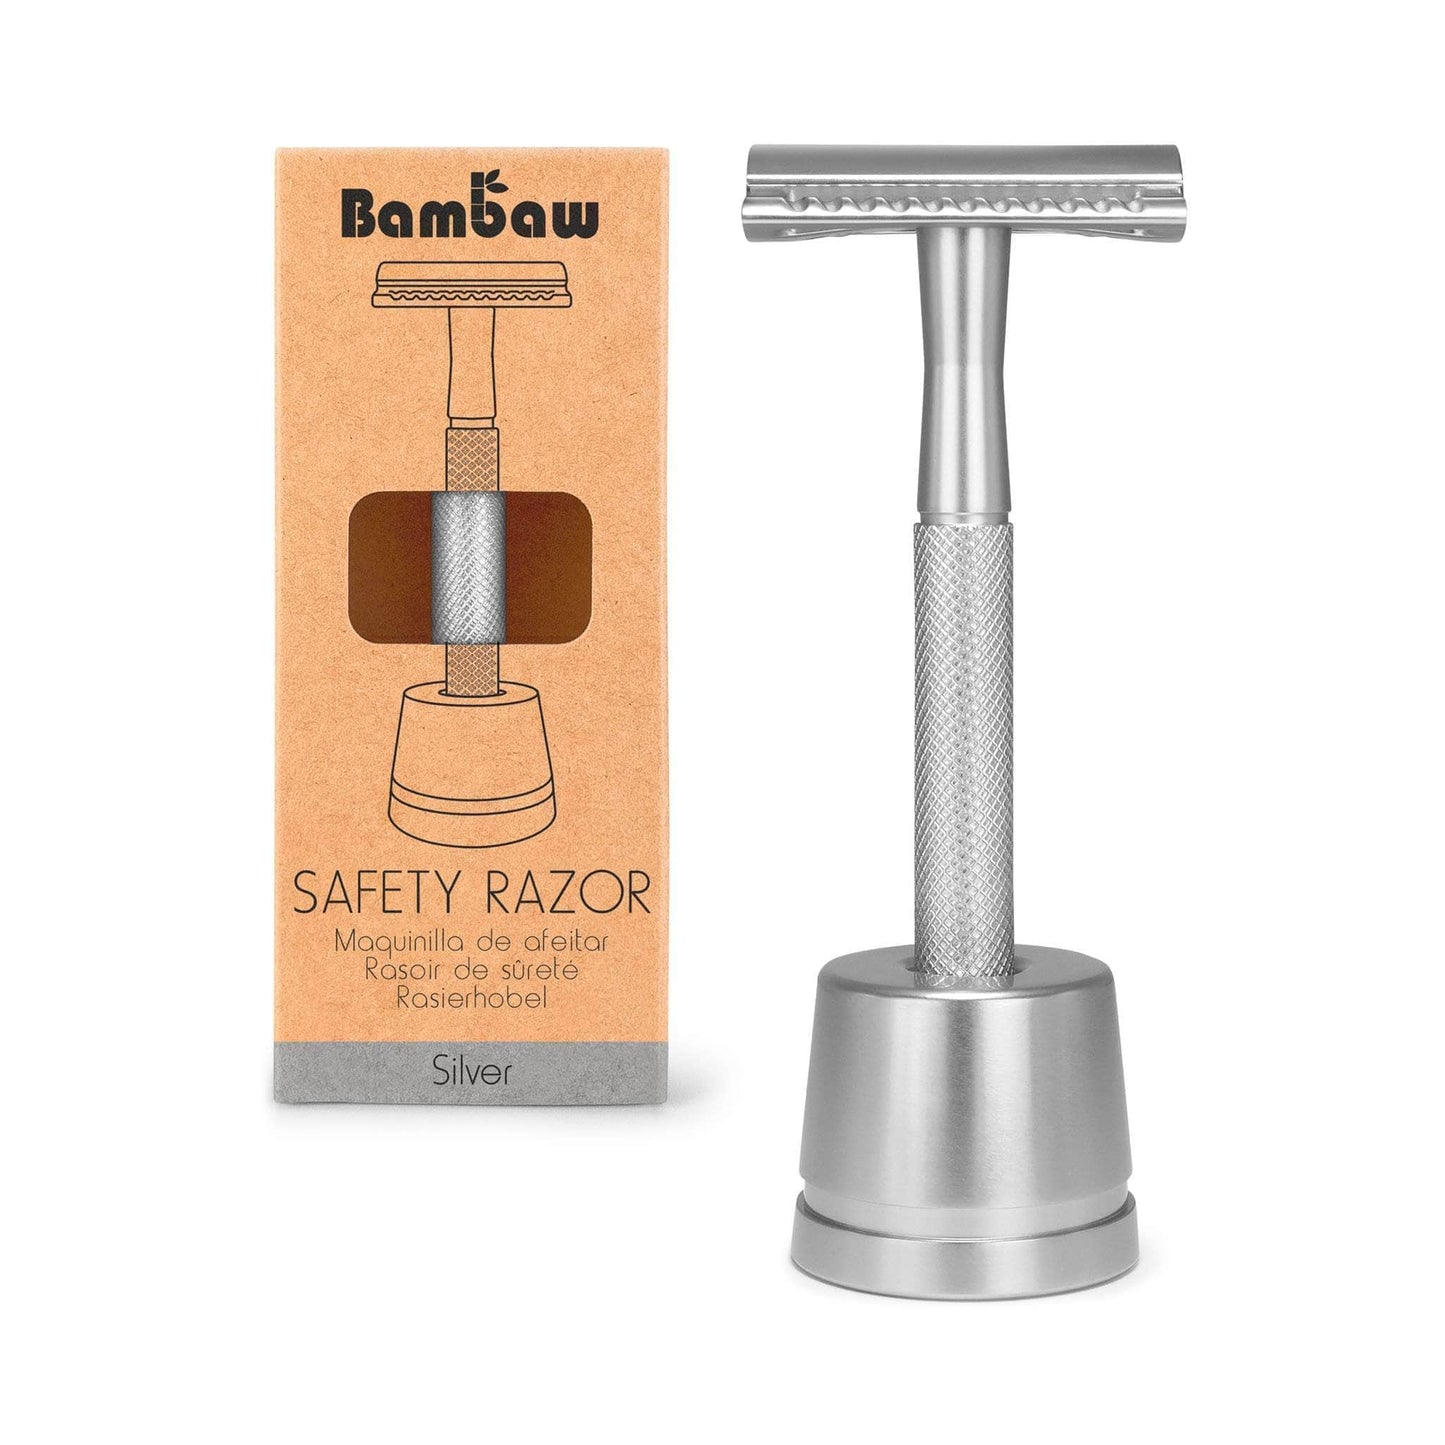 Bambaw Shaving Accessories Silver Bambaw Stainless Steel Safety Razor + Stand